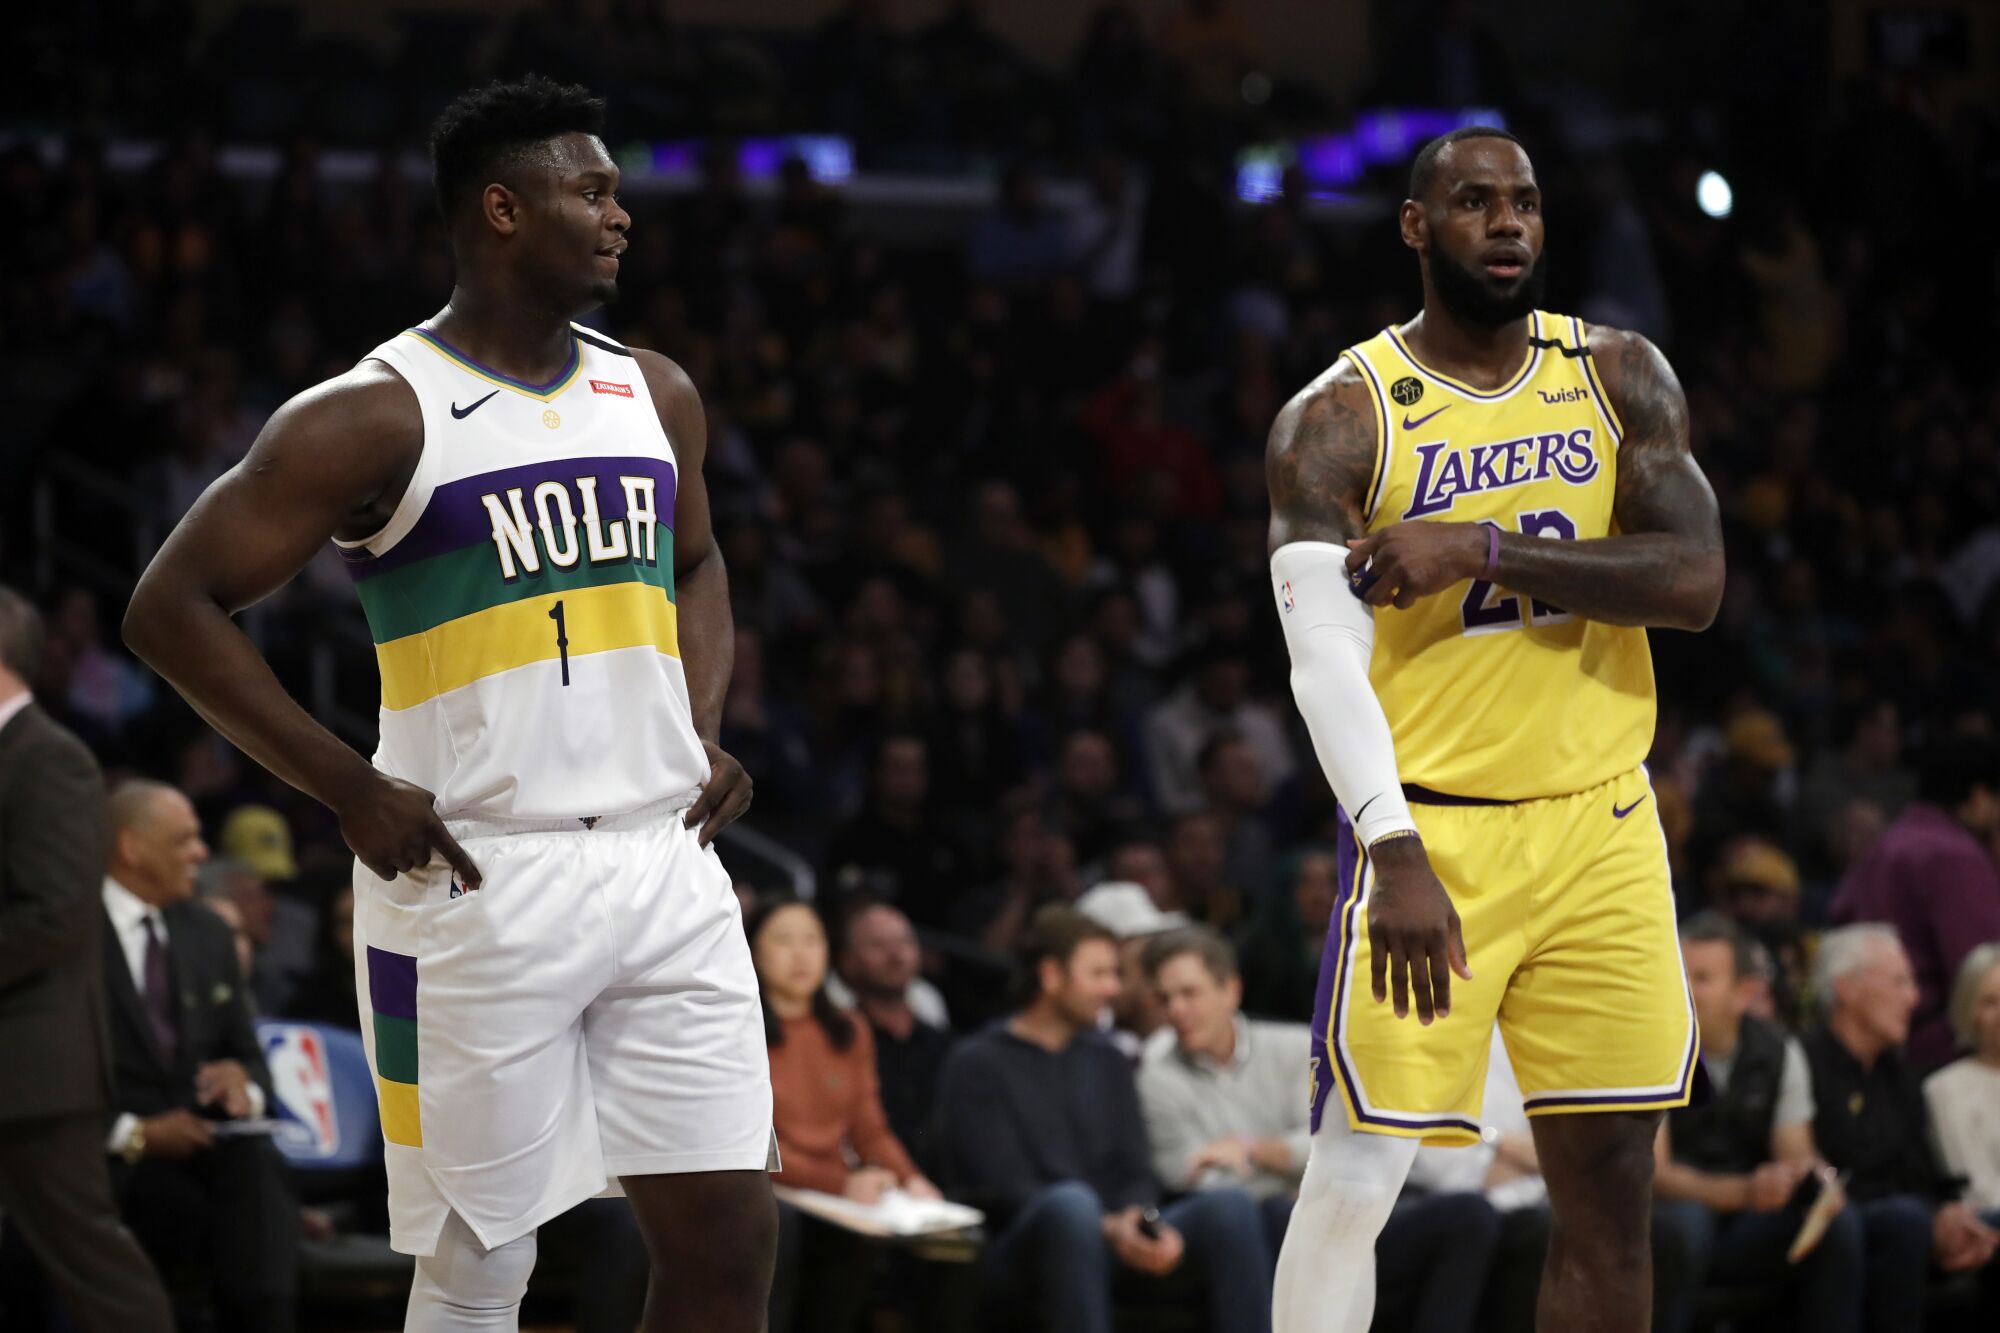 Pelicans forward Zion Williamson stands on the court next to Lakers forward LeBron James during a break in play.